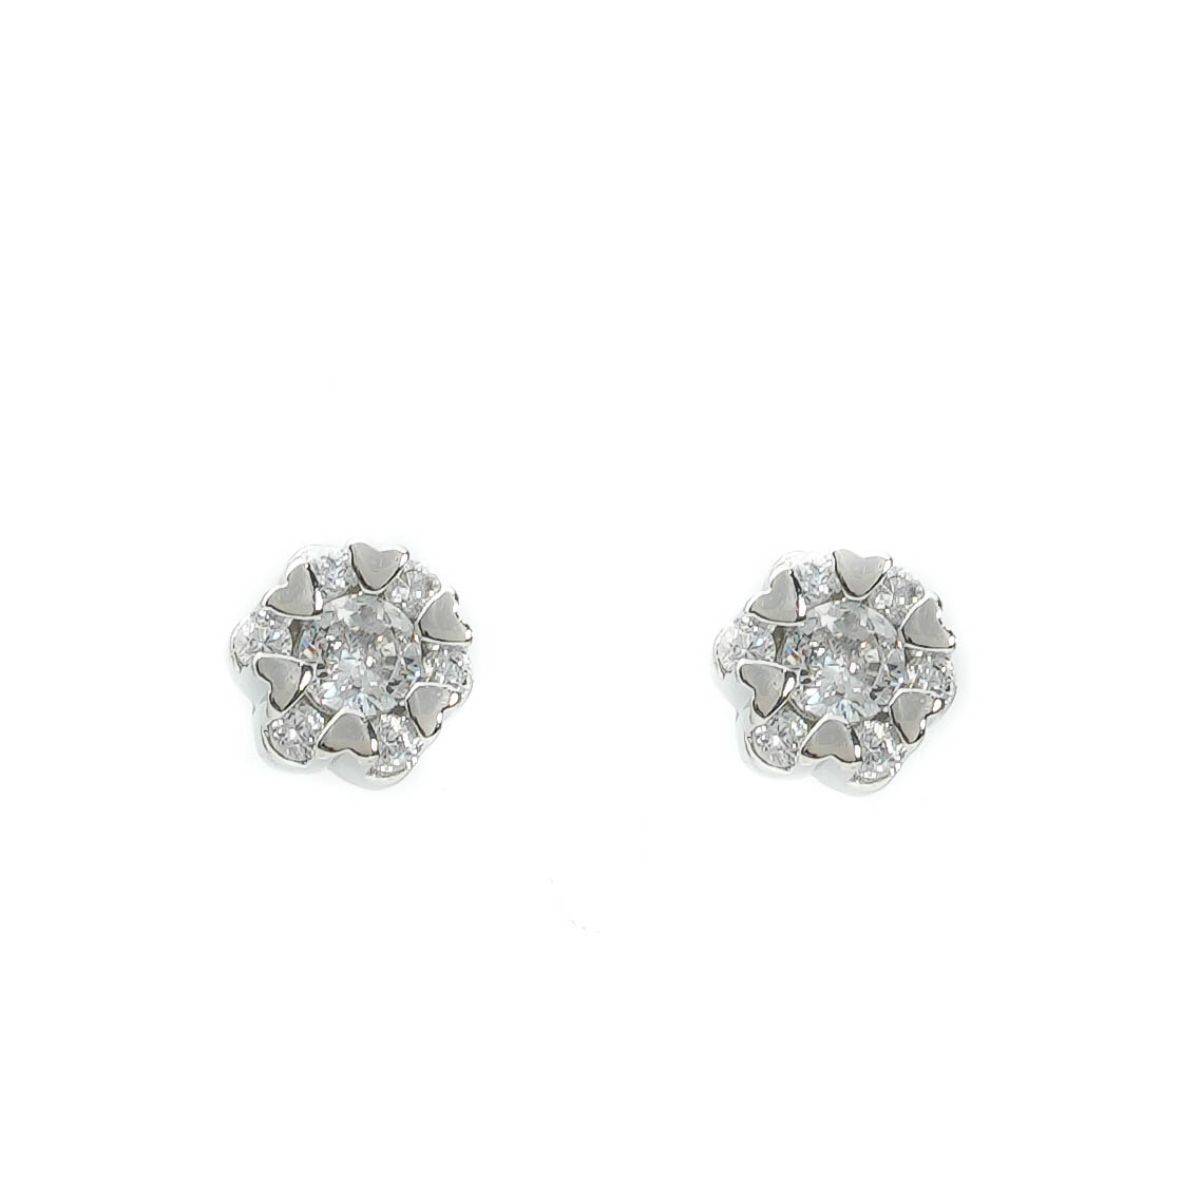 https://m.clubbella.co/product/ariah-edelweiss-sterling-silver-earrings/ Ariah Edelweiss Sterling Earrings (3)